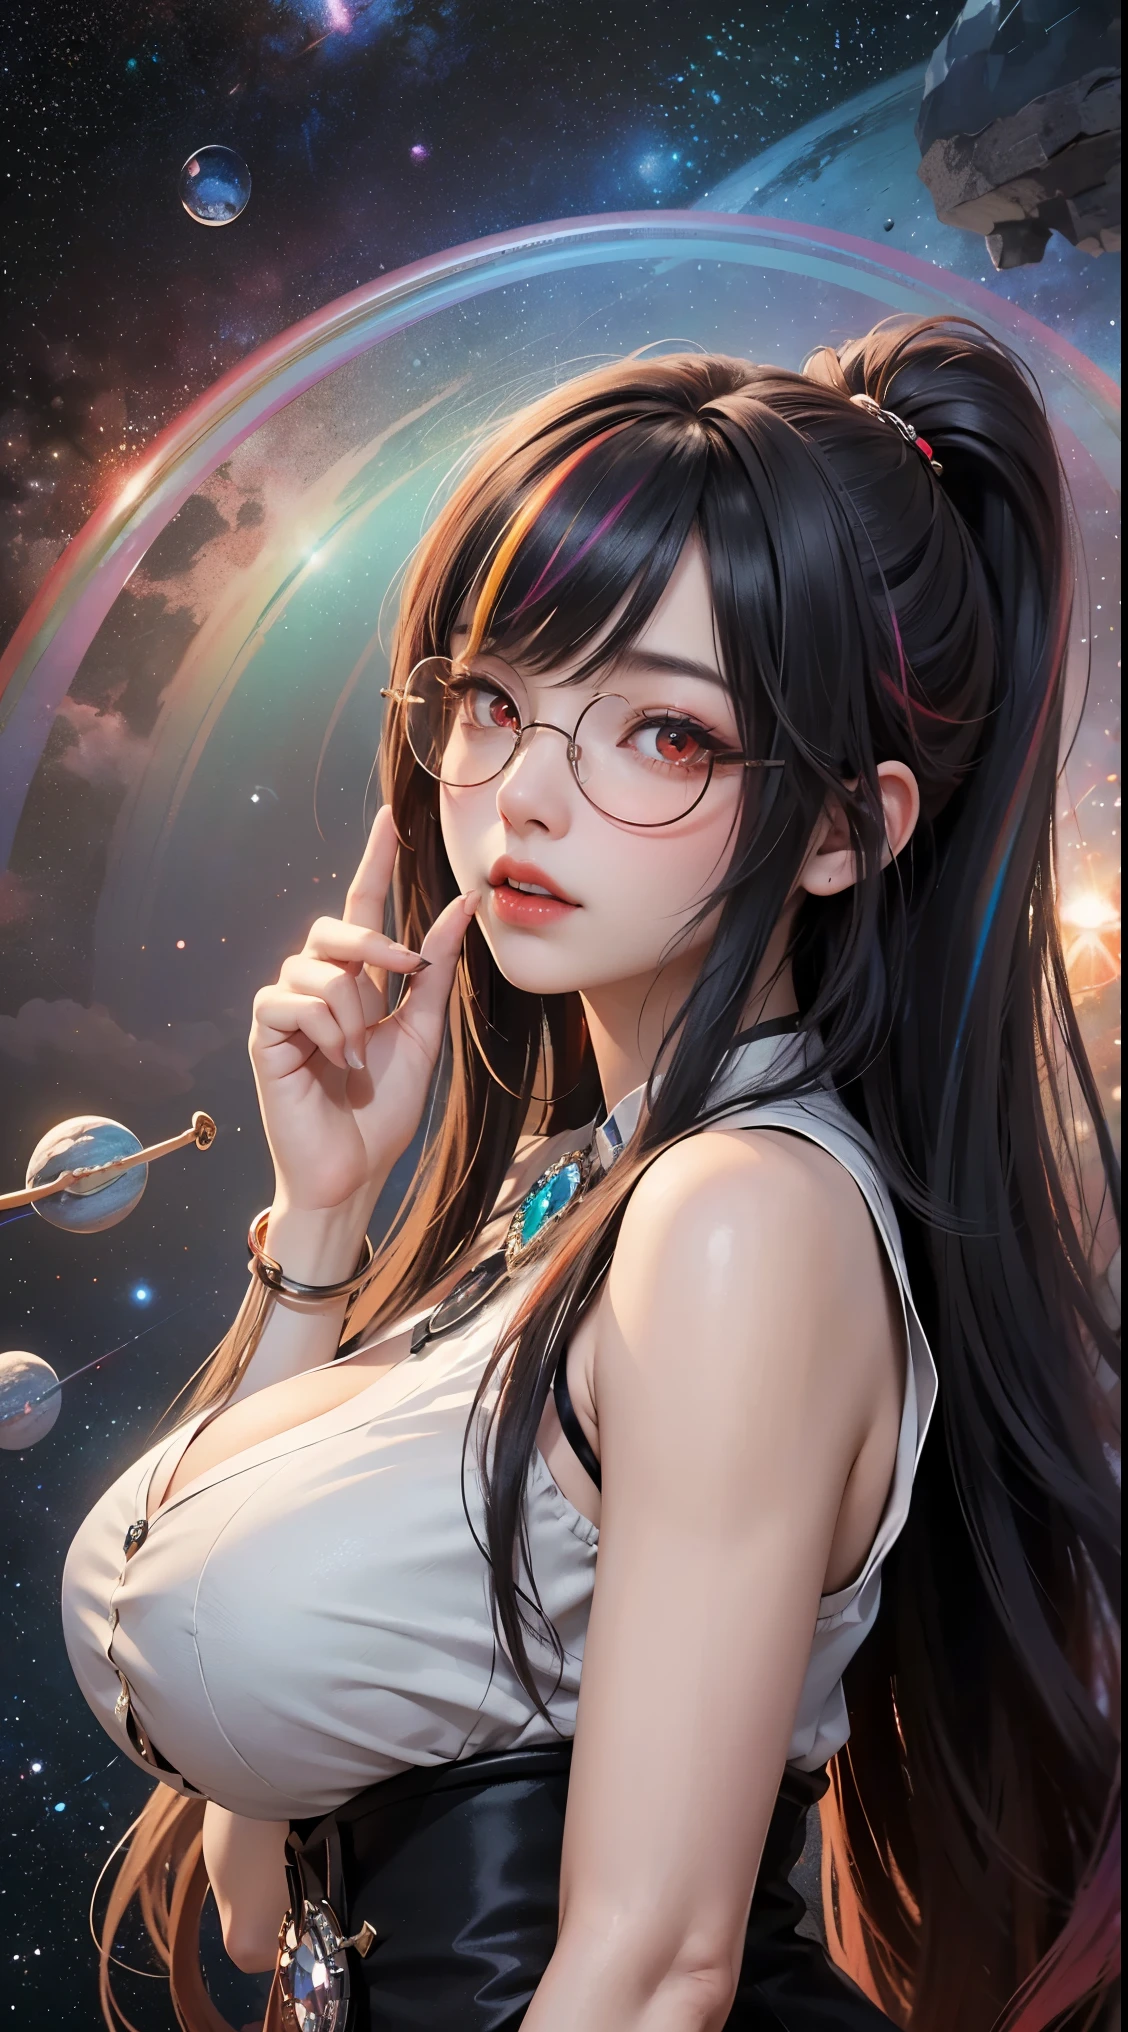 1 person 27 years old woman, got it、(best illustration)、8K UHD resolution、intricate details、最high quality、realistic、Super detailed、best writing、best shadow、soft lighting、ultra HD、Dungeon and Dragon、cave、Dungeon、 necromancer、night、dark style、Succubus、devil&#39;Daughter of、bat wings，(((Demon Horn Rack Rim Round Glasses))))、(((big breasts)))、(devil&#39;tail)、(red eyes shine:1.6)、masterpiece、beautiful features、Tyndall effect、realisticphotograph、(high detail skin:1.2)、8KUHD、Digital single-lens reflex camera、high quality、photograph、High resolution、 absurdes、Ponytail distortion、Optimal ratio of 4 fingers and 1 thumb、1 girl、hair ornaments、A necklace of bright red gems、gem、beautiful expression、body up、big breasts emphasis、tight waist、wide ass、Tyndall effect、Photoreal、(high detail skin:1.2)、dark and mysterious version, lipstick red lips, thin and beautiful lips, Don&#39;Don&#39;Don&#39;don&#39;t laugh, please shut your mouth, Characters created by Karol Baku and Pino Denis, intricate details, detailed background, very detailed, magic of light, woman, cute face, ((((giant glasses, otaku glasses, thick glasses, round glasses))))、 looking at the Upper body of the goddess , round chest, big and round chest, phoenix hair brooch, long hair with bangs, (Long hair has seven colors like a rainbow:1.9), Beautifully detailed face and well-proportioned eyes, (Crystal clear red eyes: 1.8), Big round eyes and very beautiful and detailed makeup, Visionary, long silk nightgowns, mysterious makeup, Response, I dyed the side bangs light yellow...., Upper body, (goddess Upper body: 1.8), hanging arms, Realistic and vivid photograph, (stars that make up : 1.7), ( Space-time portal of sky and imagination: 1.8), fiction art, RAWphotograph,Photograph of a black kimono, The best photograph , expensive_response, 最high quality, The best photograph, 8K quality, 8k ultra , Surrealism, The most economical authentic photograph, Artistic portrait of 12 signs, Symbol of one of the 12 signs on the reverse side, 12 Portrait of the Goddess, The most realistic color scheme, The best photograph color, masterpiece, hair ornaments, Neck response, jewelry, beautiful face, Upper body, Tyndall effect, Photograph-like, Dark studio, border light, two tone light, (fine skin) expensive: 1.2), 8K UHD, Digital single-lens reflex camera, soft light, expensive quality, volume light, Frank, photograph, expensive responseolution, 4K quality, 8K, bokeh, smooth and sharp, 10x more pixels, Charming goddess, sexy goddess, (background space: 1.8), (milky way: 1.7), Aurora, lightning, (Auroraの背景: 1.8) <roller:crazy_perfect eyes_v1_from_v1_, beautiful goddess and flowers,